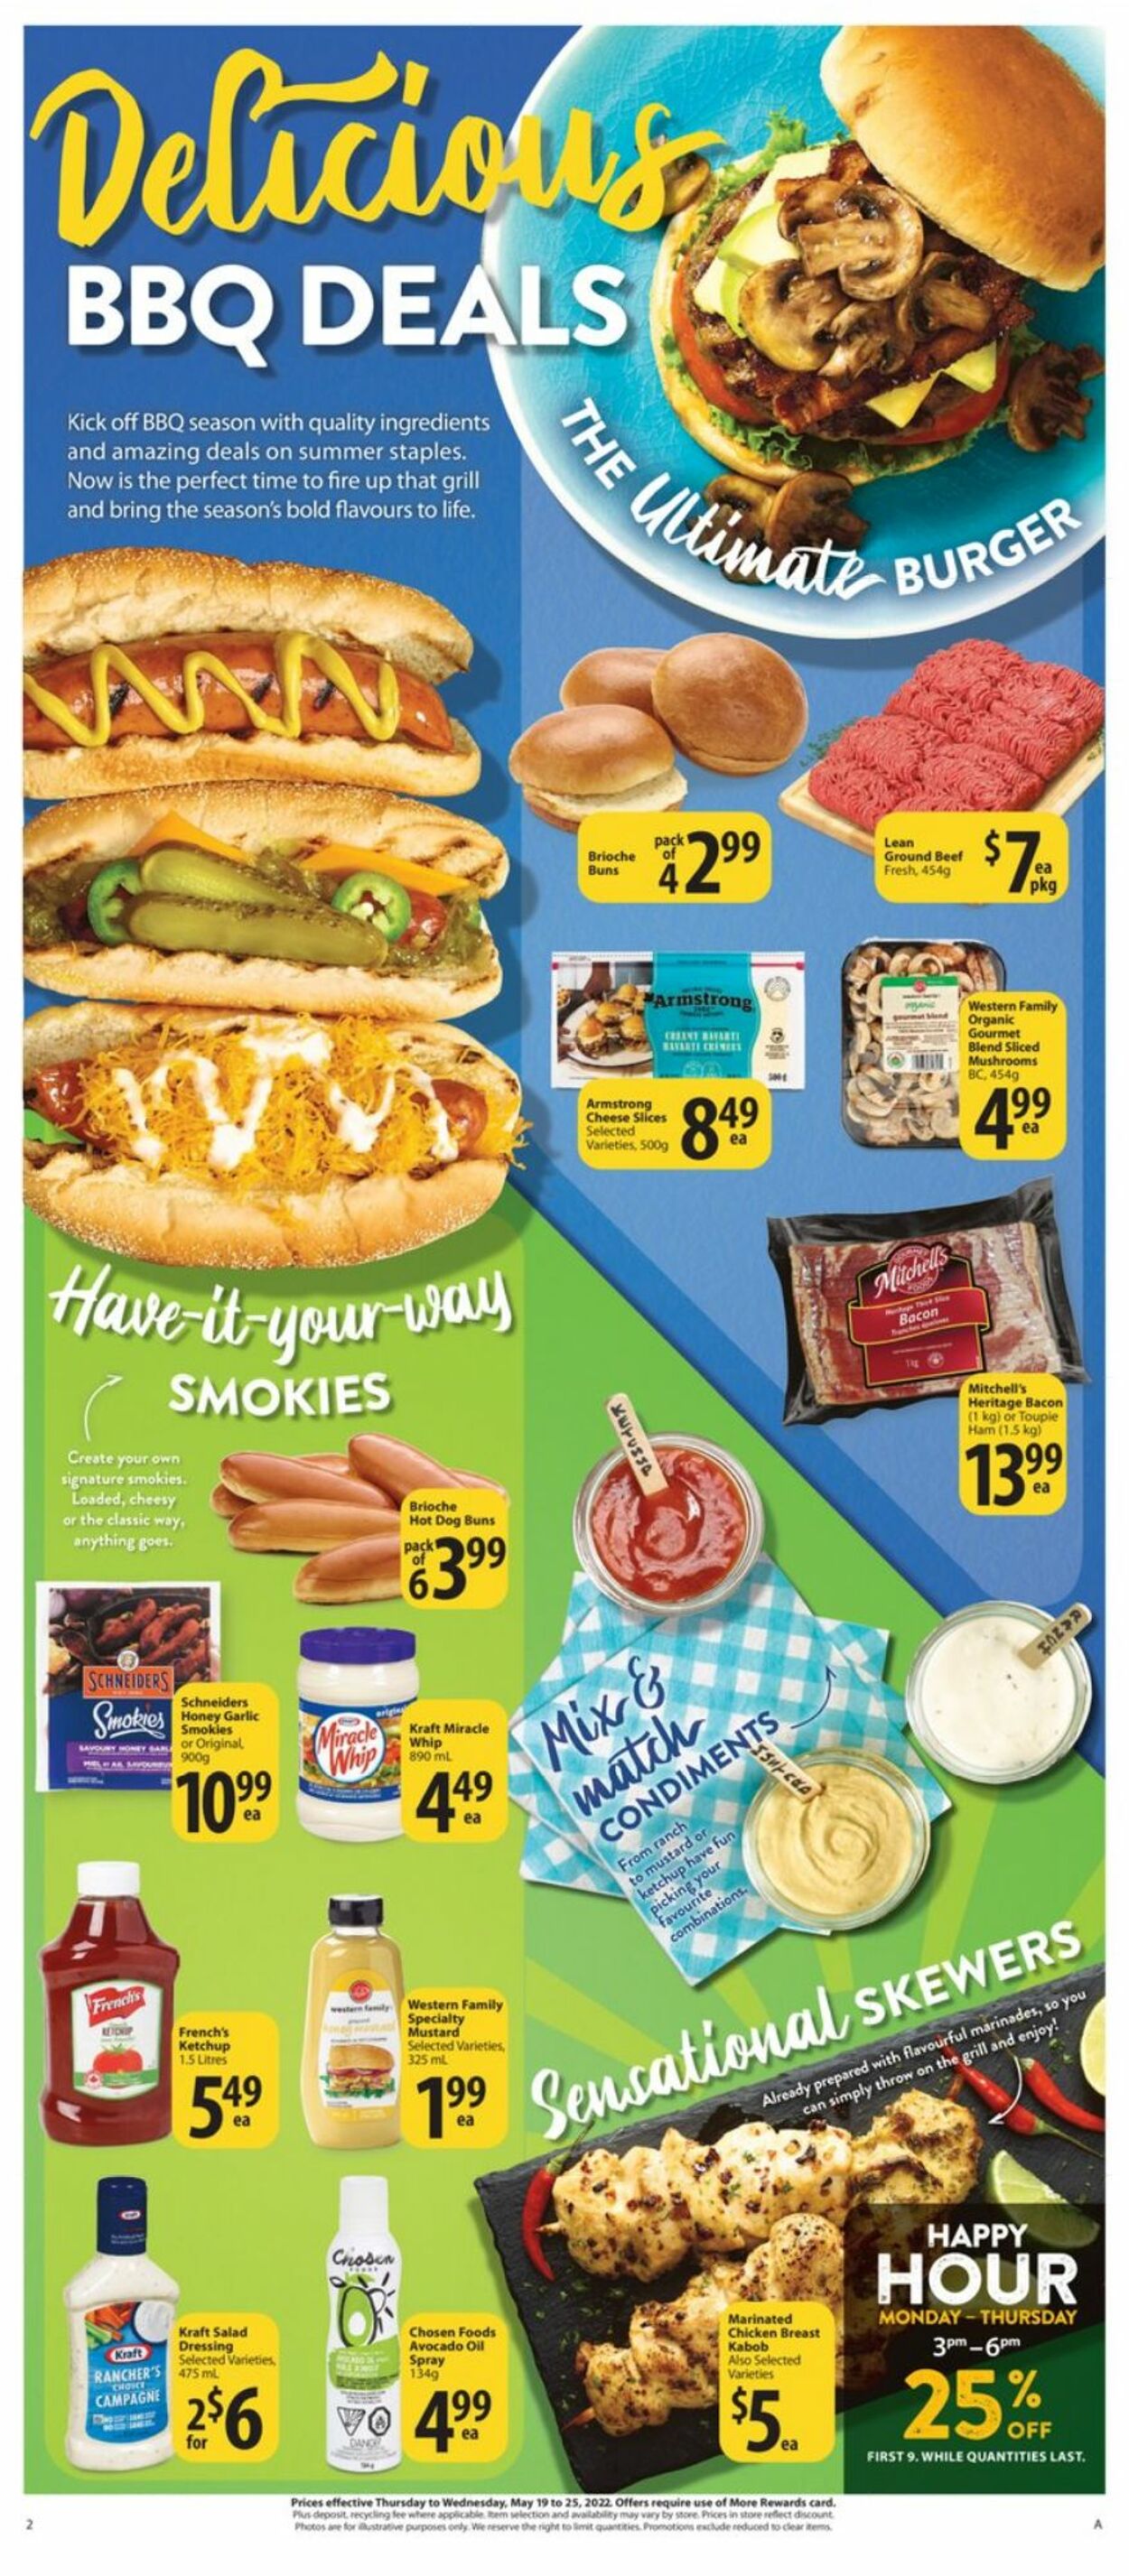 Flyer Save-On-Foods 19.05.2022 - 25.05.2022